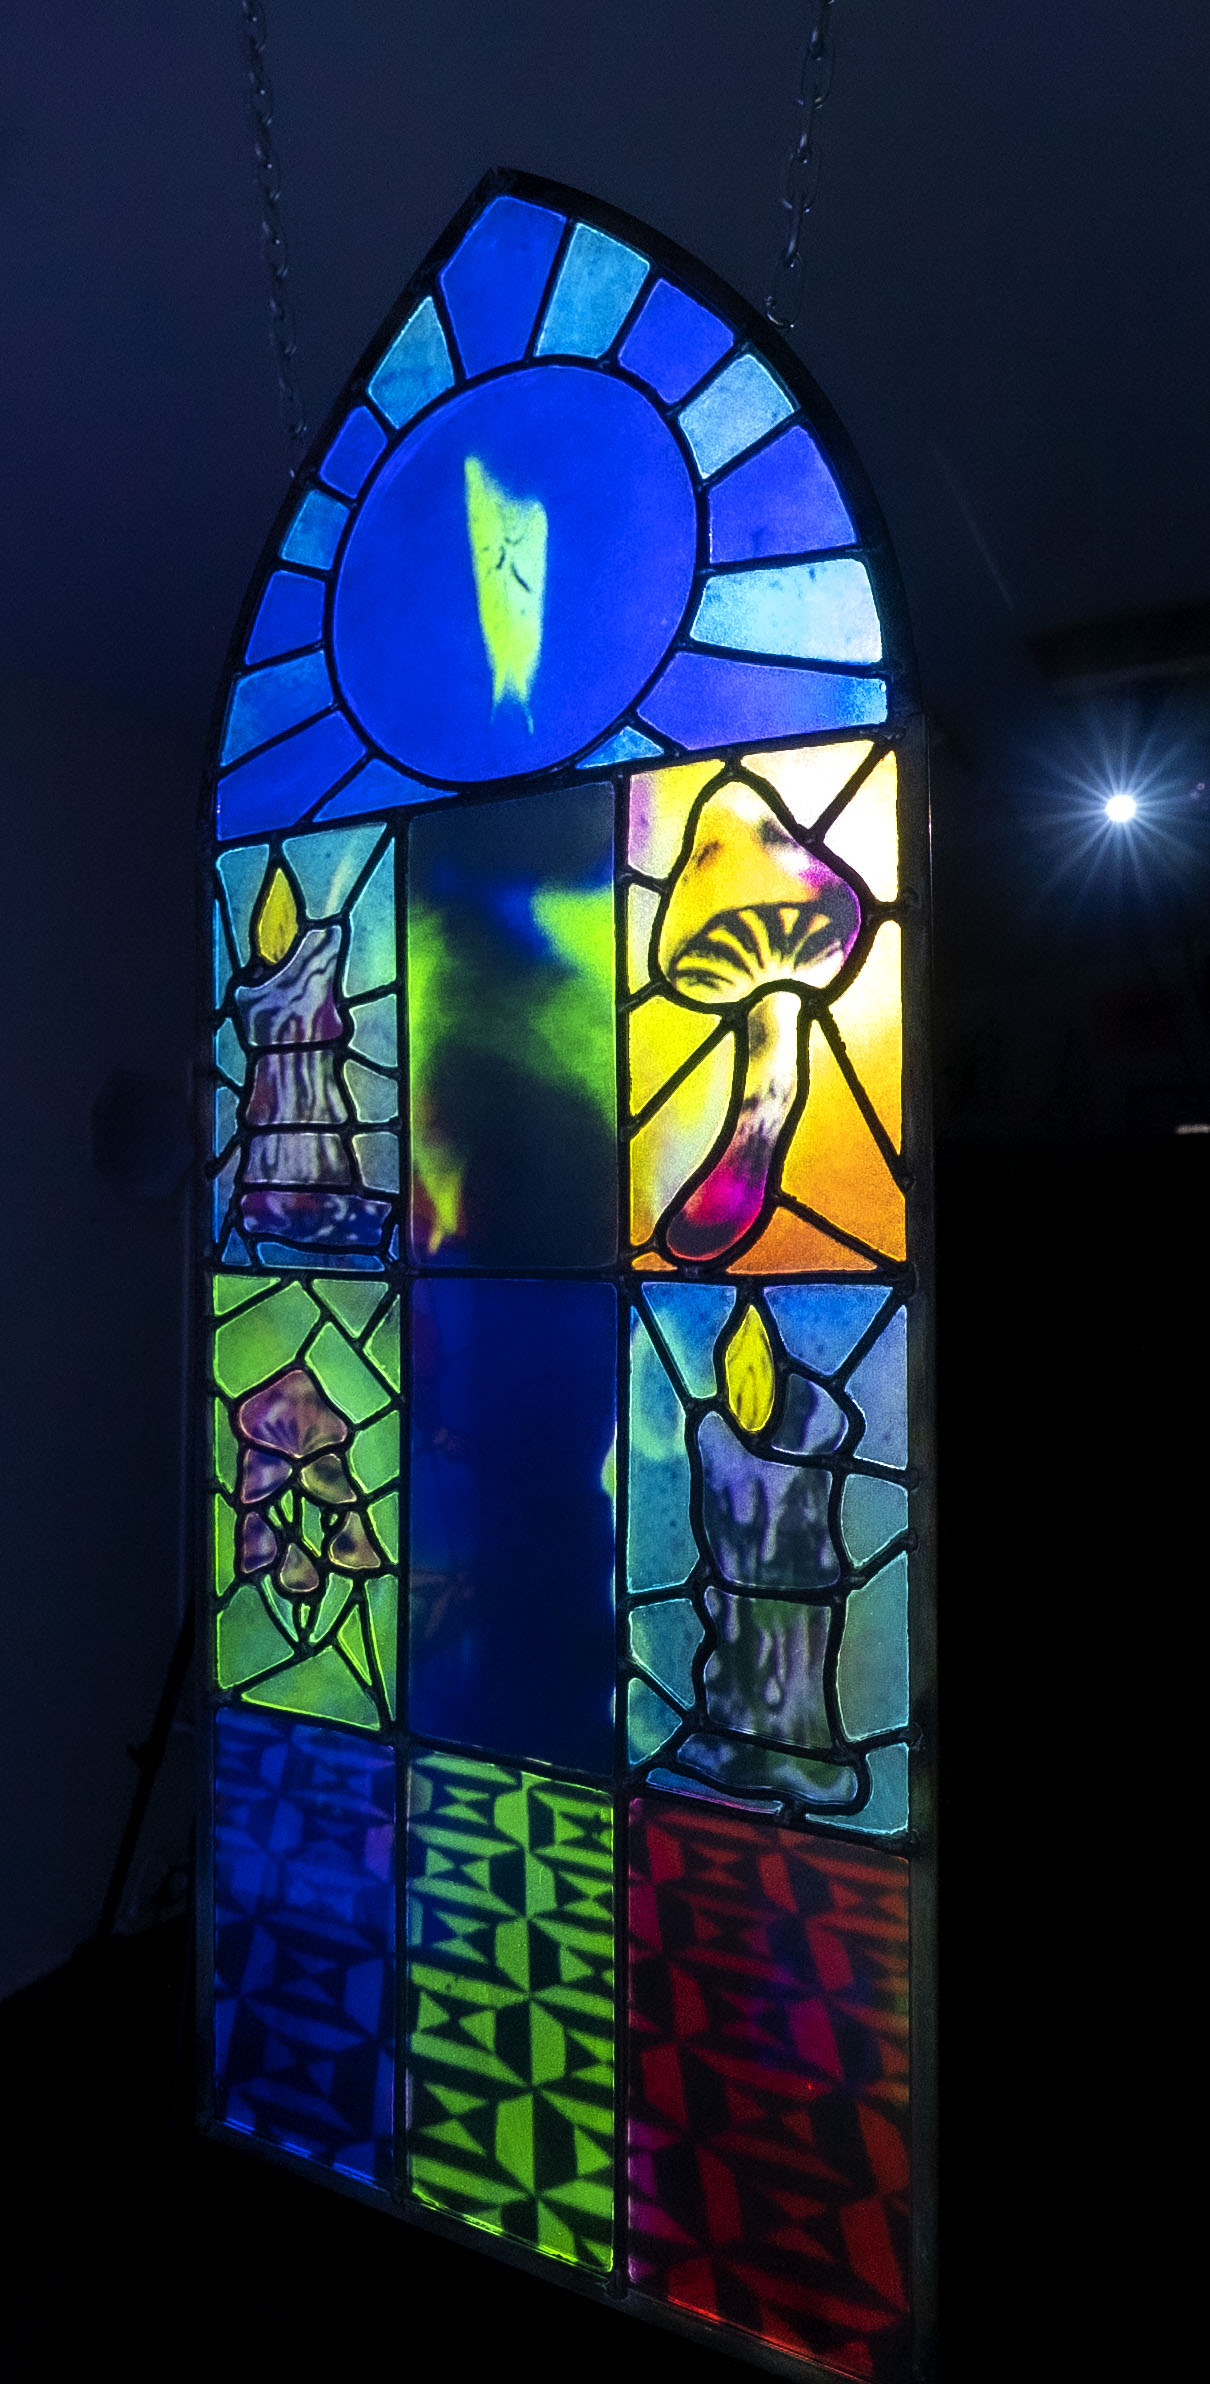 An arched stained glass window illuminated with images of candles, mushrooms and modern tile patterns